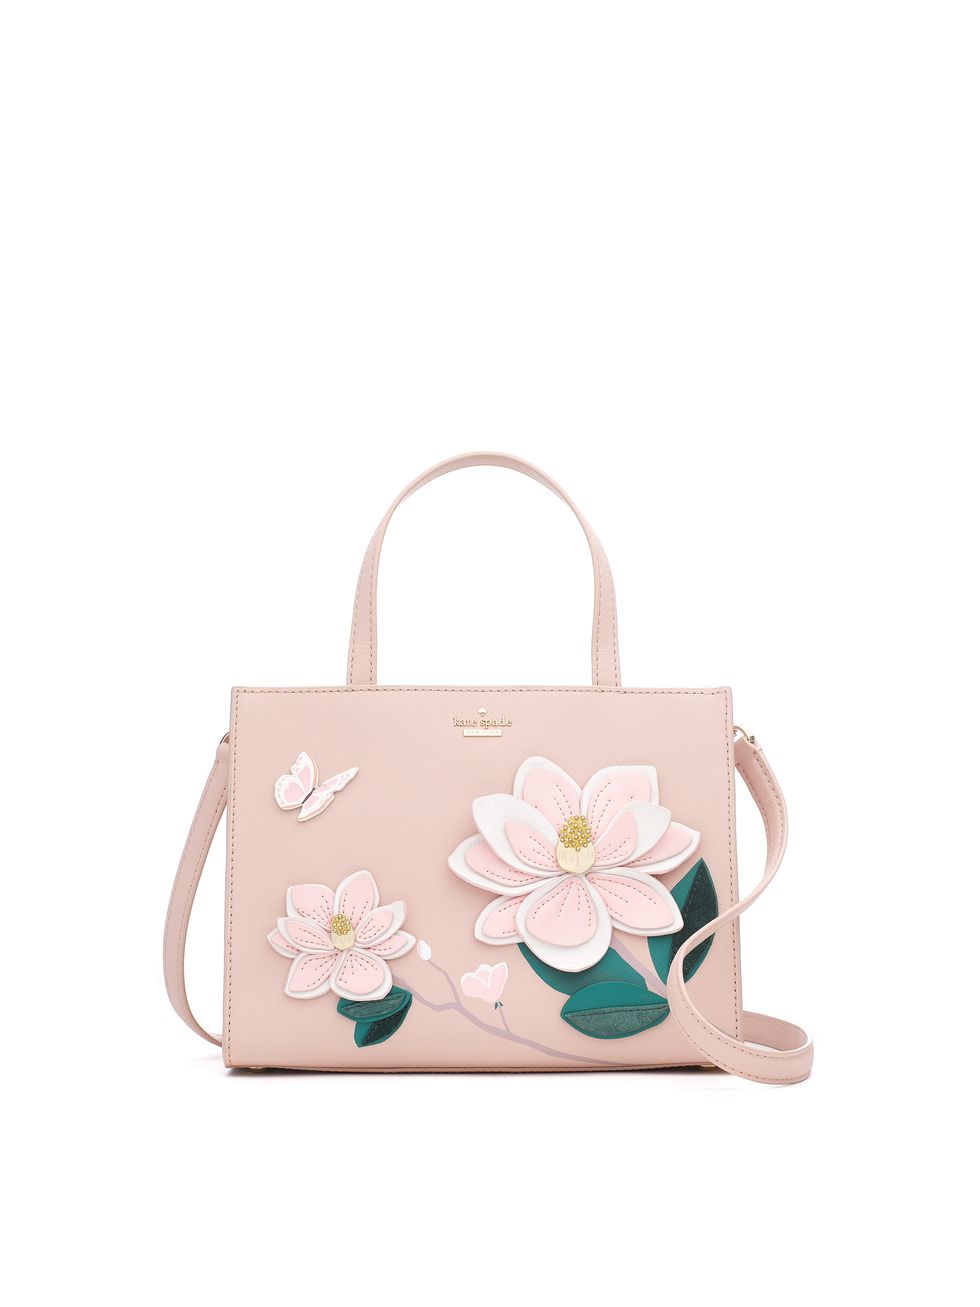 How Much Is a Kate Spade Purse?